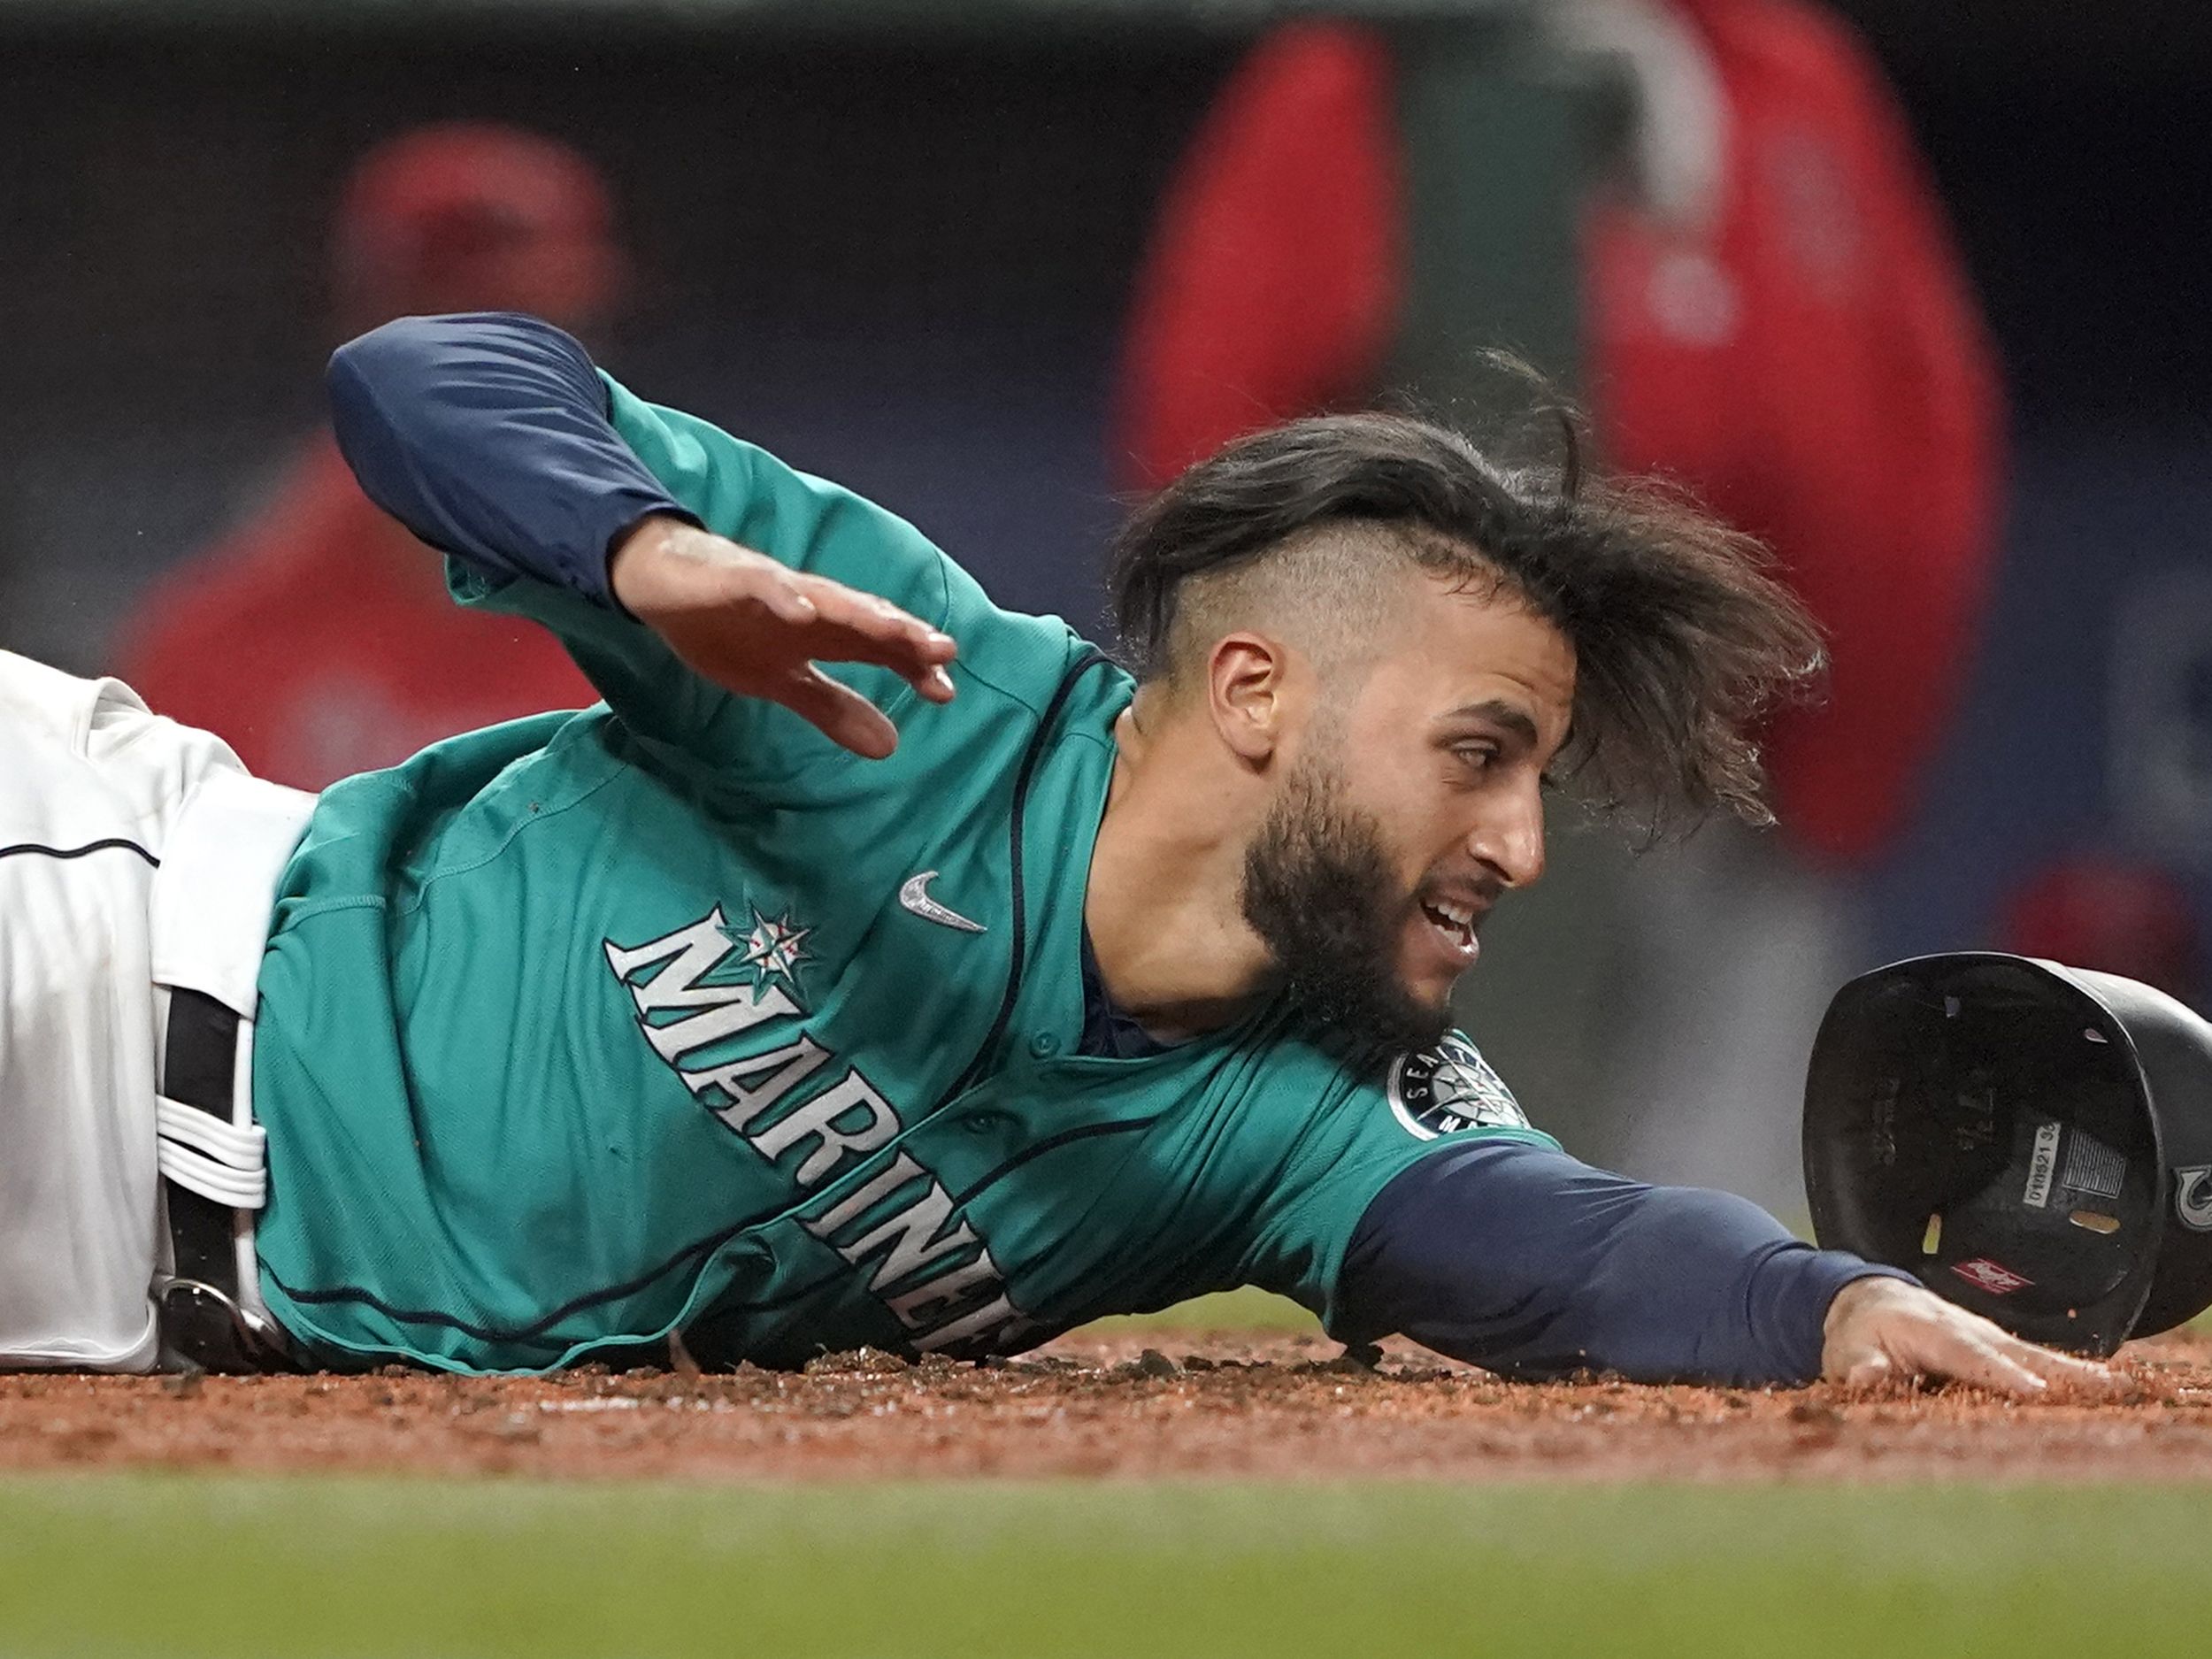 A Grip on Sports: When Toro and Moore come up big, Mariner fans say thanks  and wonder how an improbable win actually happened